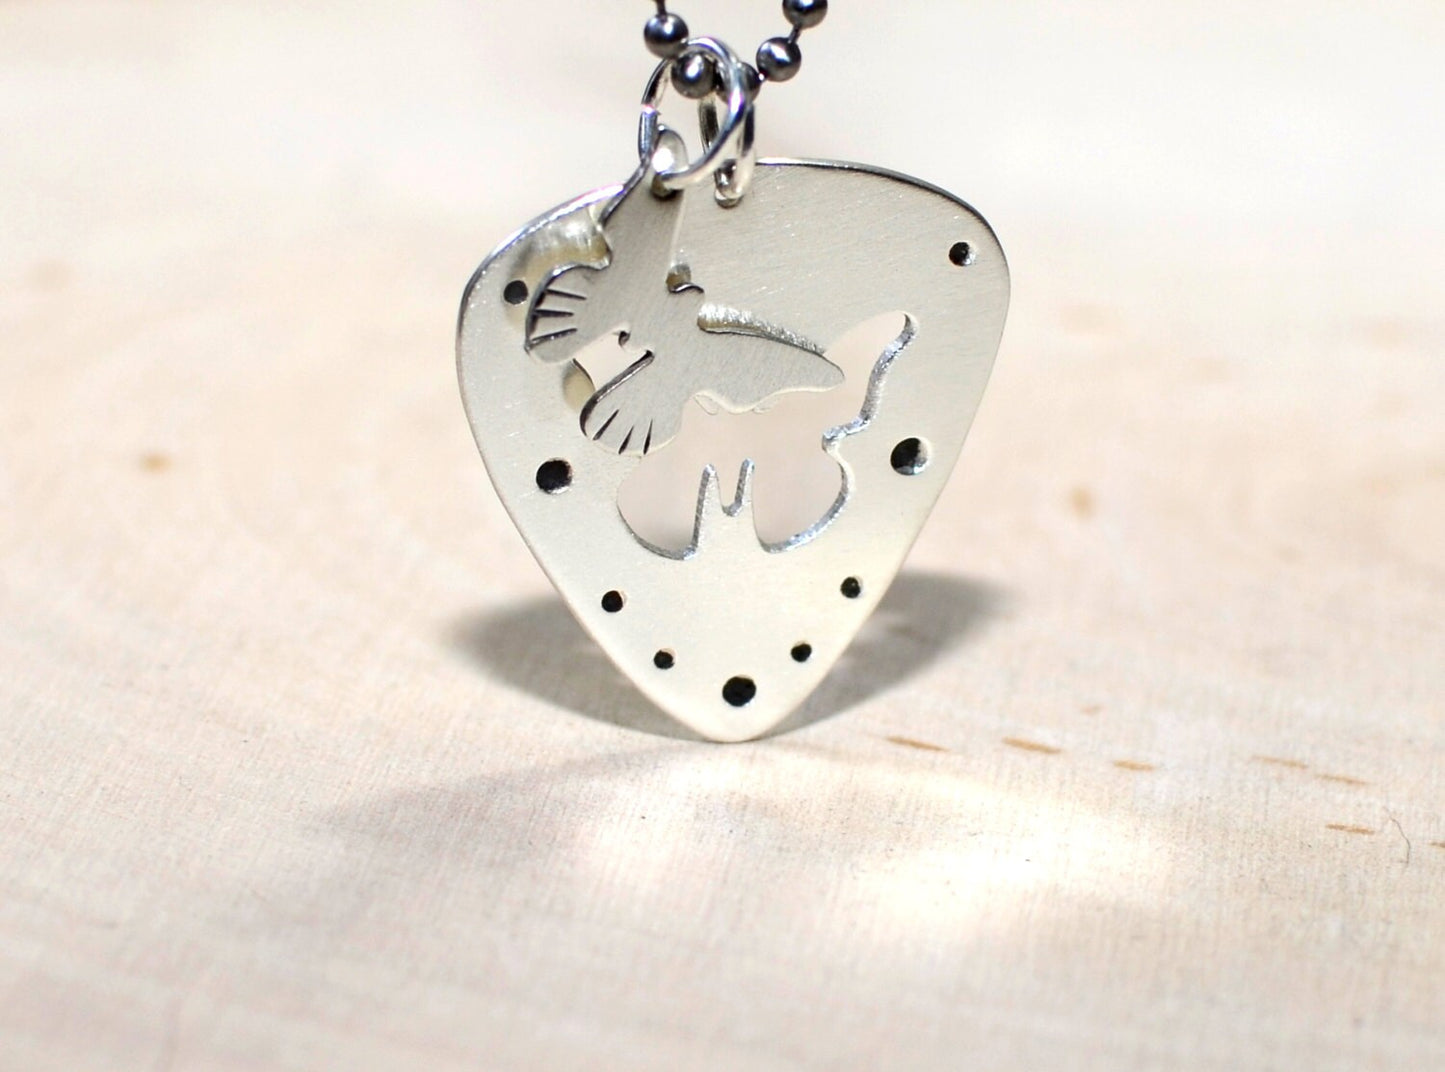 Sterling Silver Butterfly Necklace